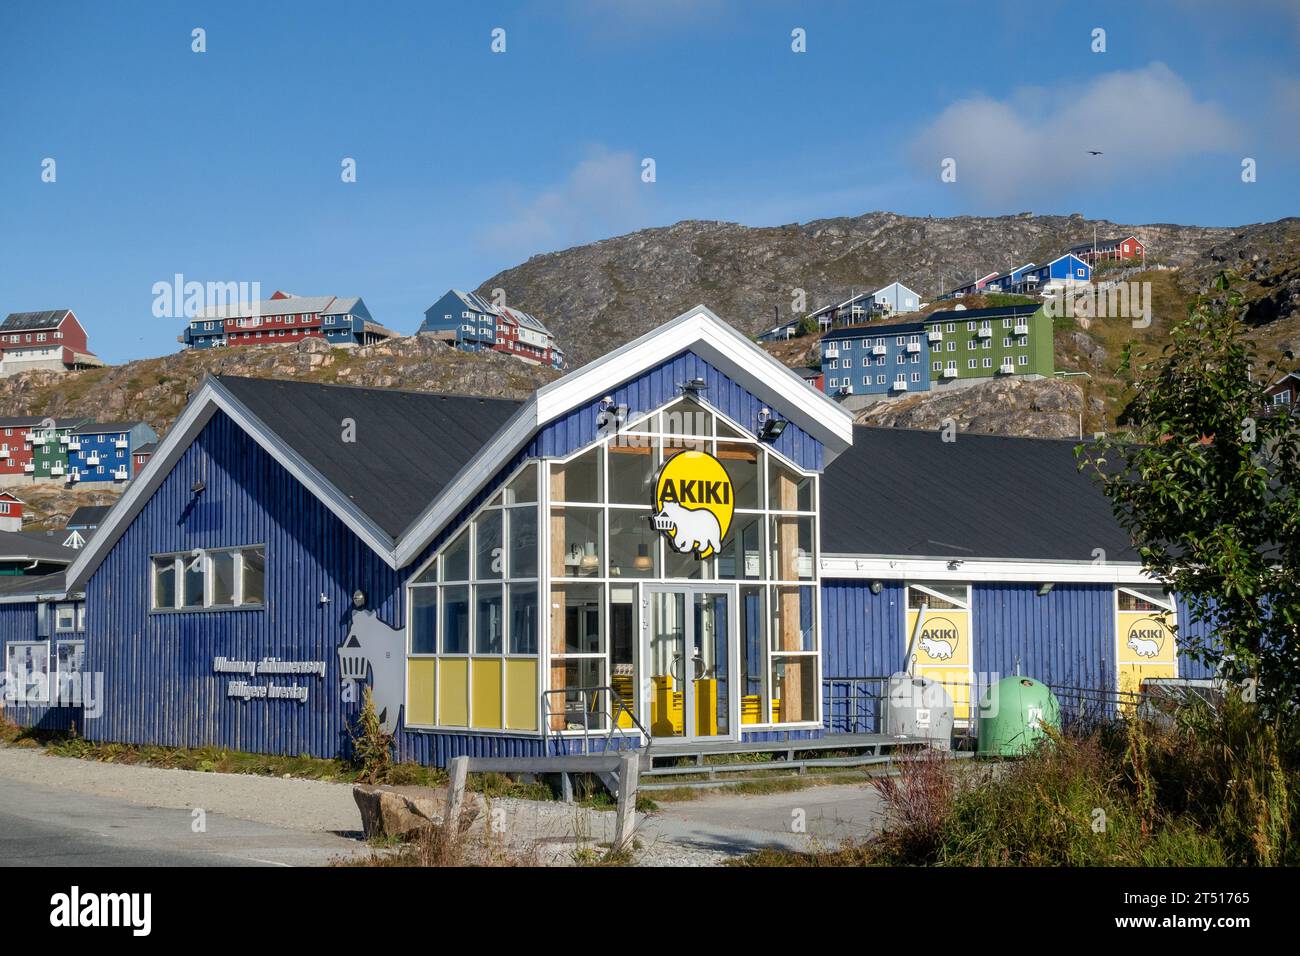 Akiki Supermarket Building With Polar Bear Logo In Qaqortoq Greenland Grocery Store, Aikiki Is Owned By Pisiffik A/S Stock Photo